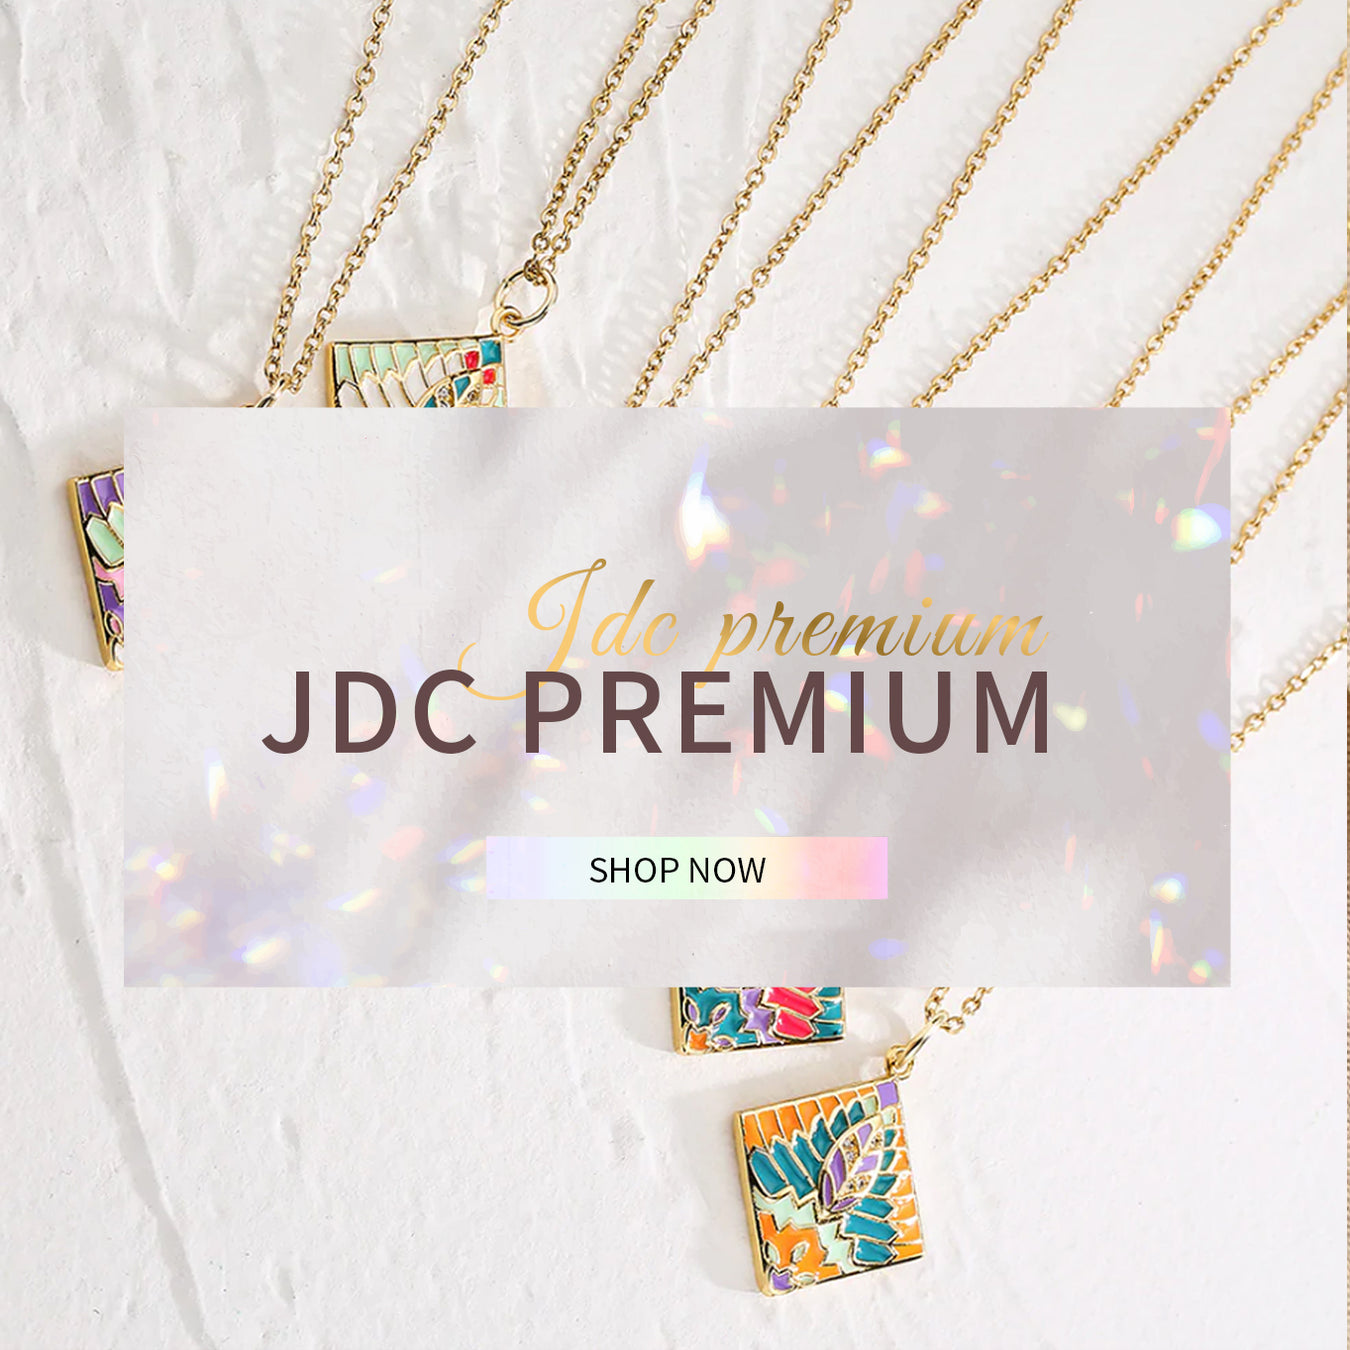 JoyasDeChina jewelry& accessories wholesale factory outlet store is dedicated to helping customers wholesale jewelry and accessories easily. Ensuring customer find the items for their business, wholesale fashion jewelry by the bulk from JDC online store.